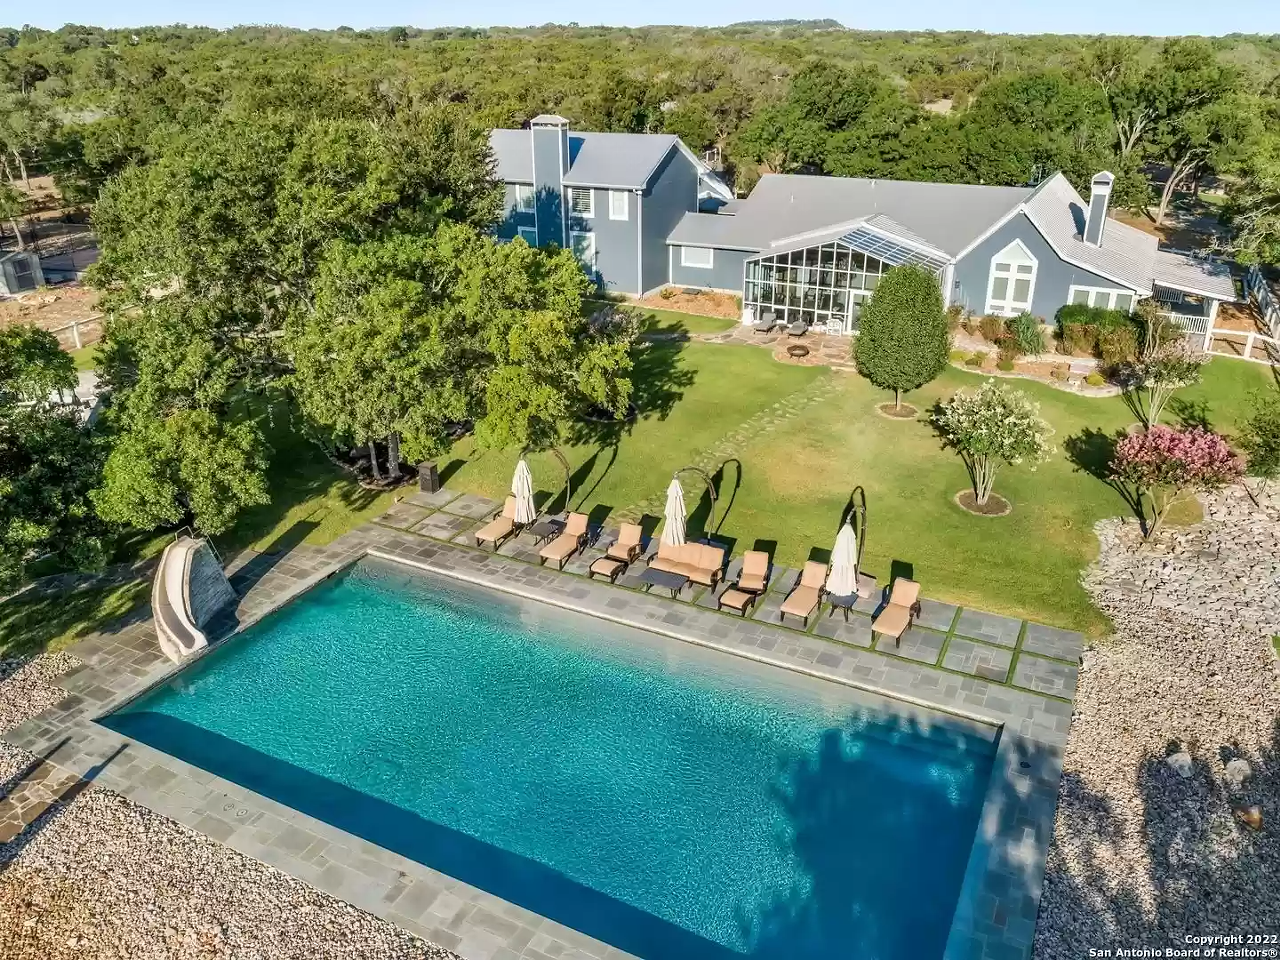 A San Antonio-area house with its own lazy and separate swimming pool is for sale for $7.4 million